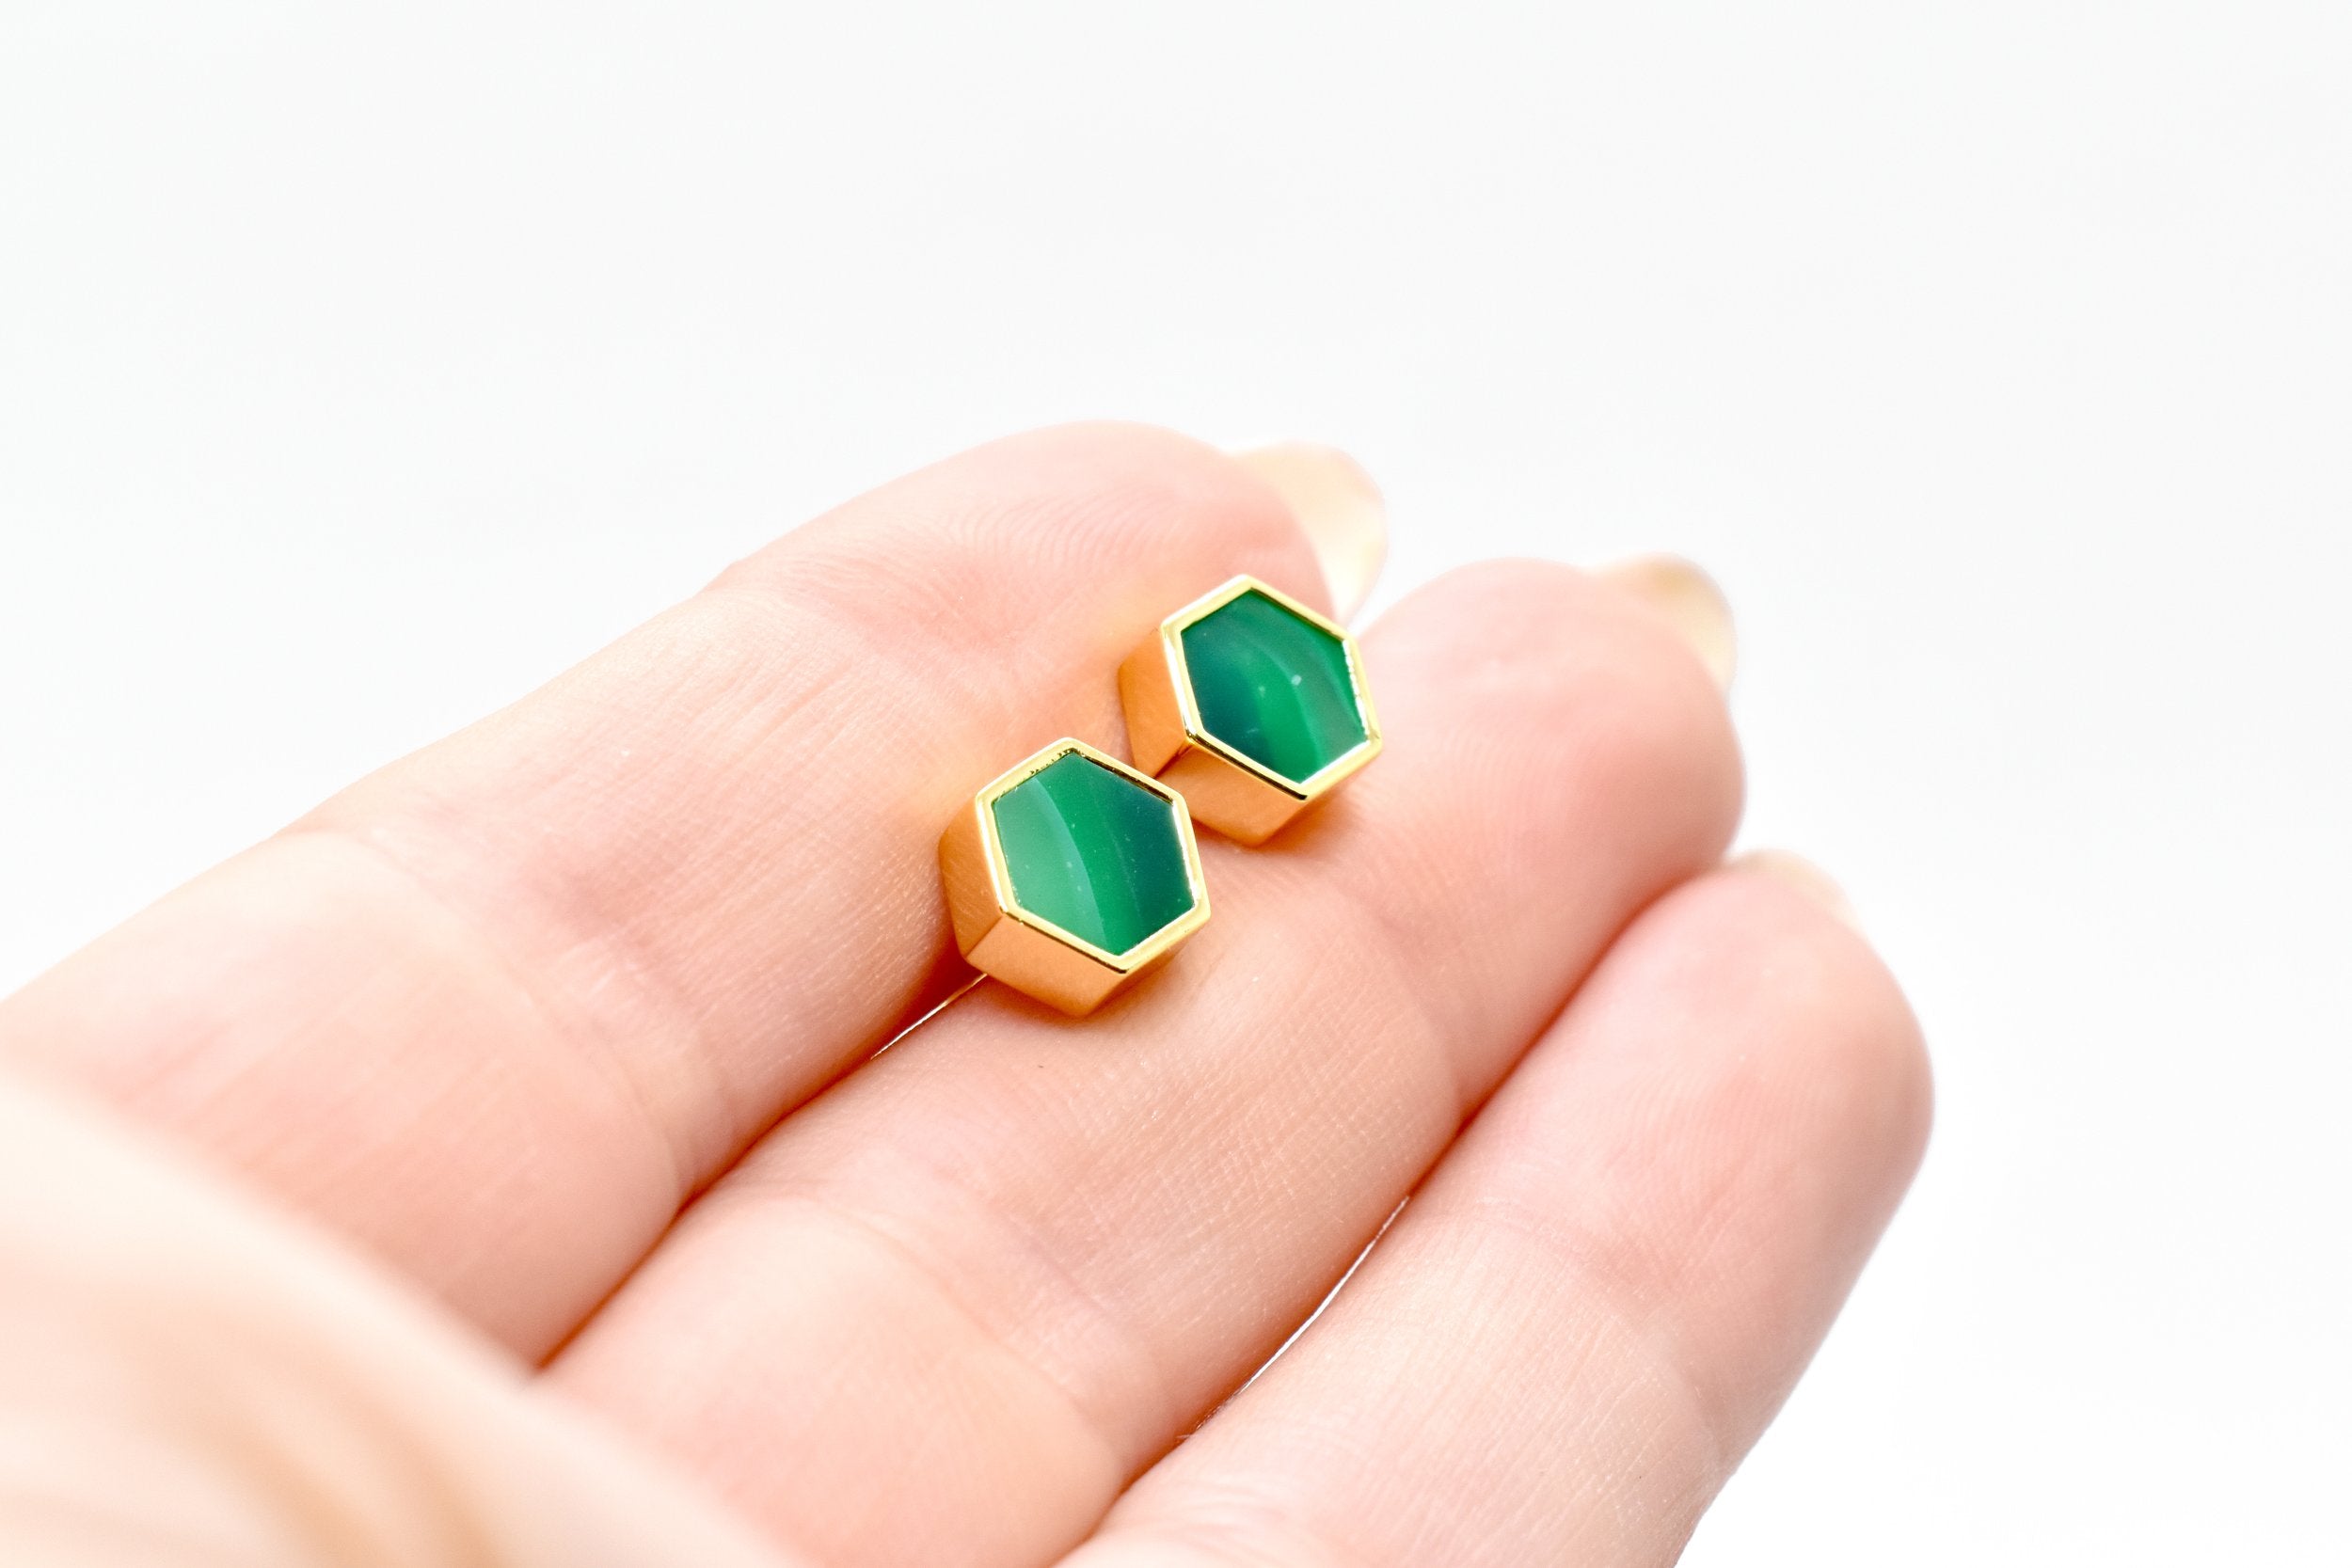 hands holding gold hexagon stud earrings with striped jade gemstone texture and 14k gold hexagon shape against a white background